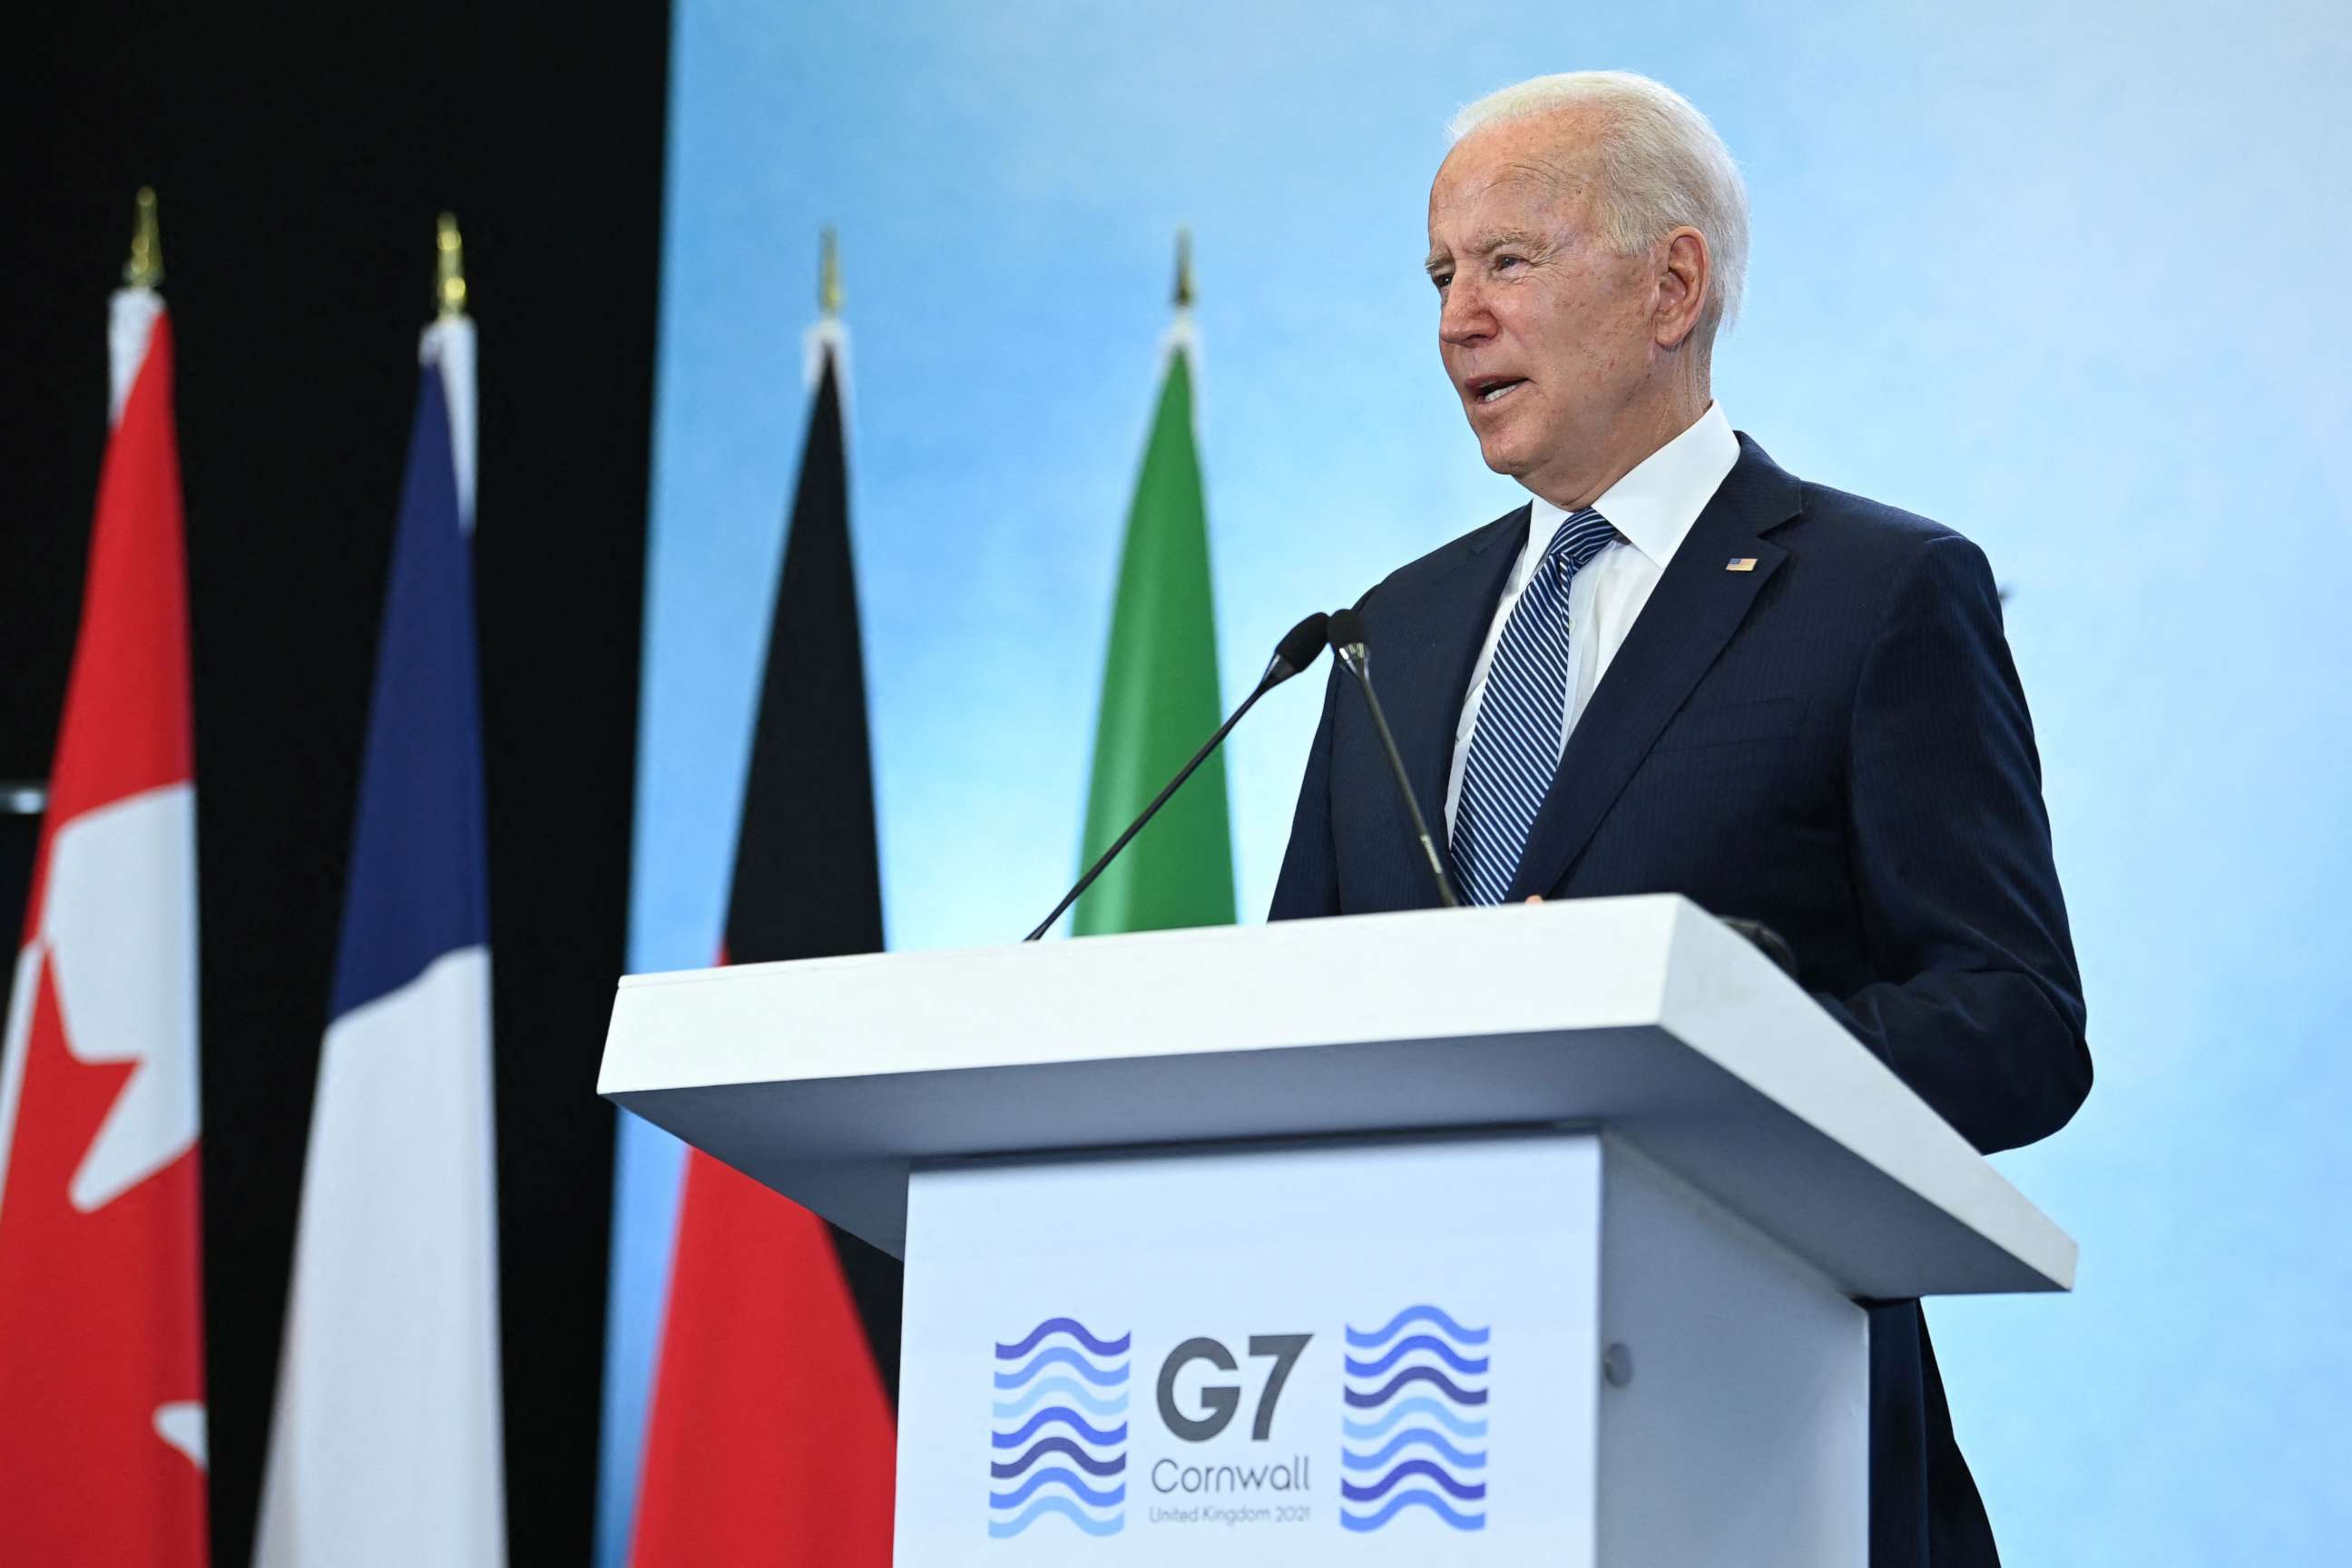 PHOTO: President Joe Biden takes part in a press conference on the final day of the G7 summit at Cornwall Airport Newquay, Cornwall, June 13, 2021.